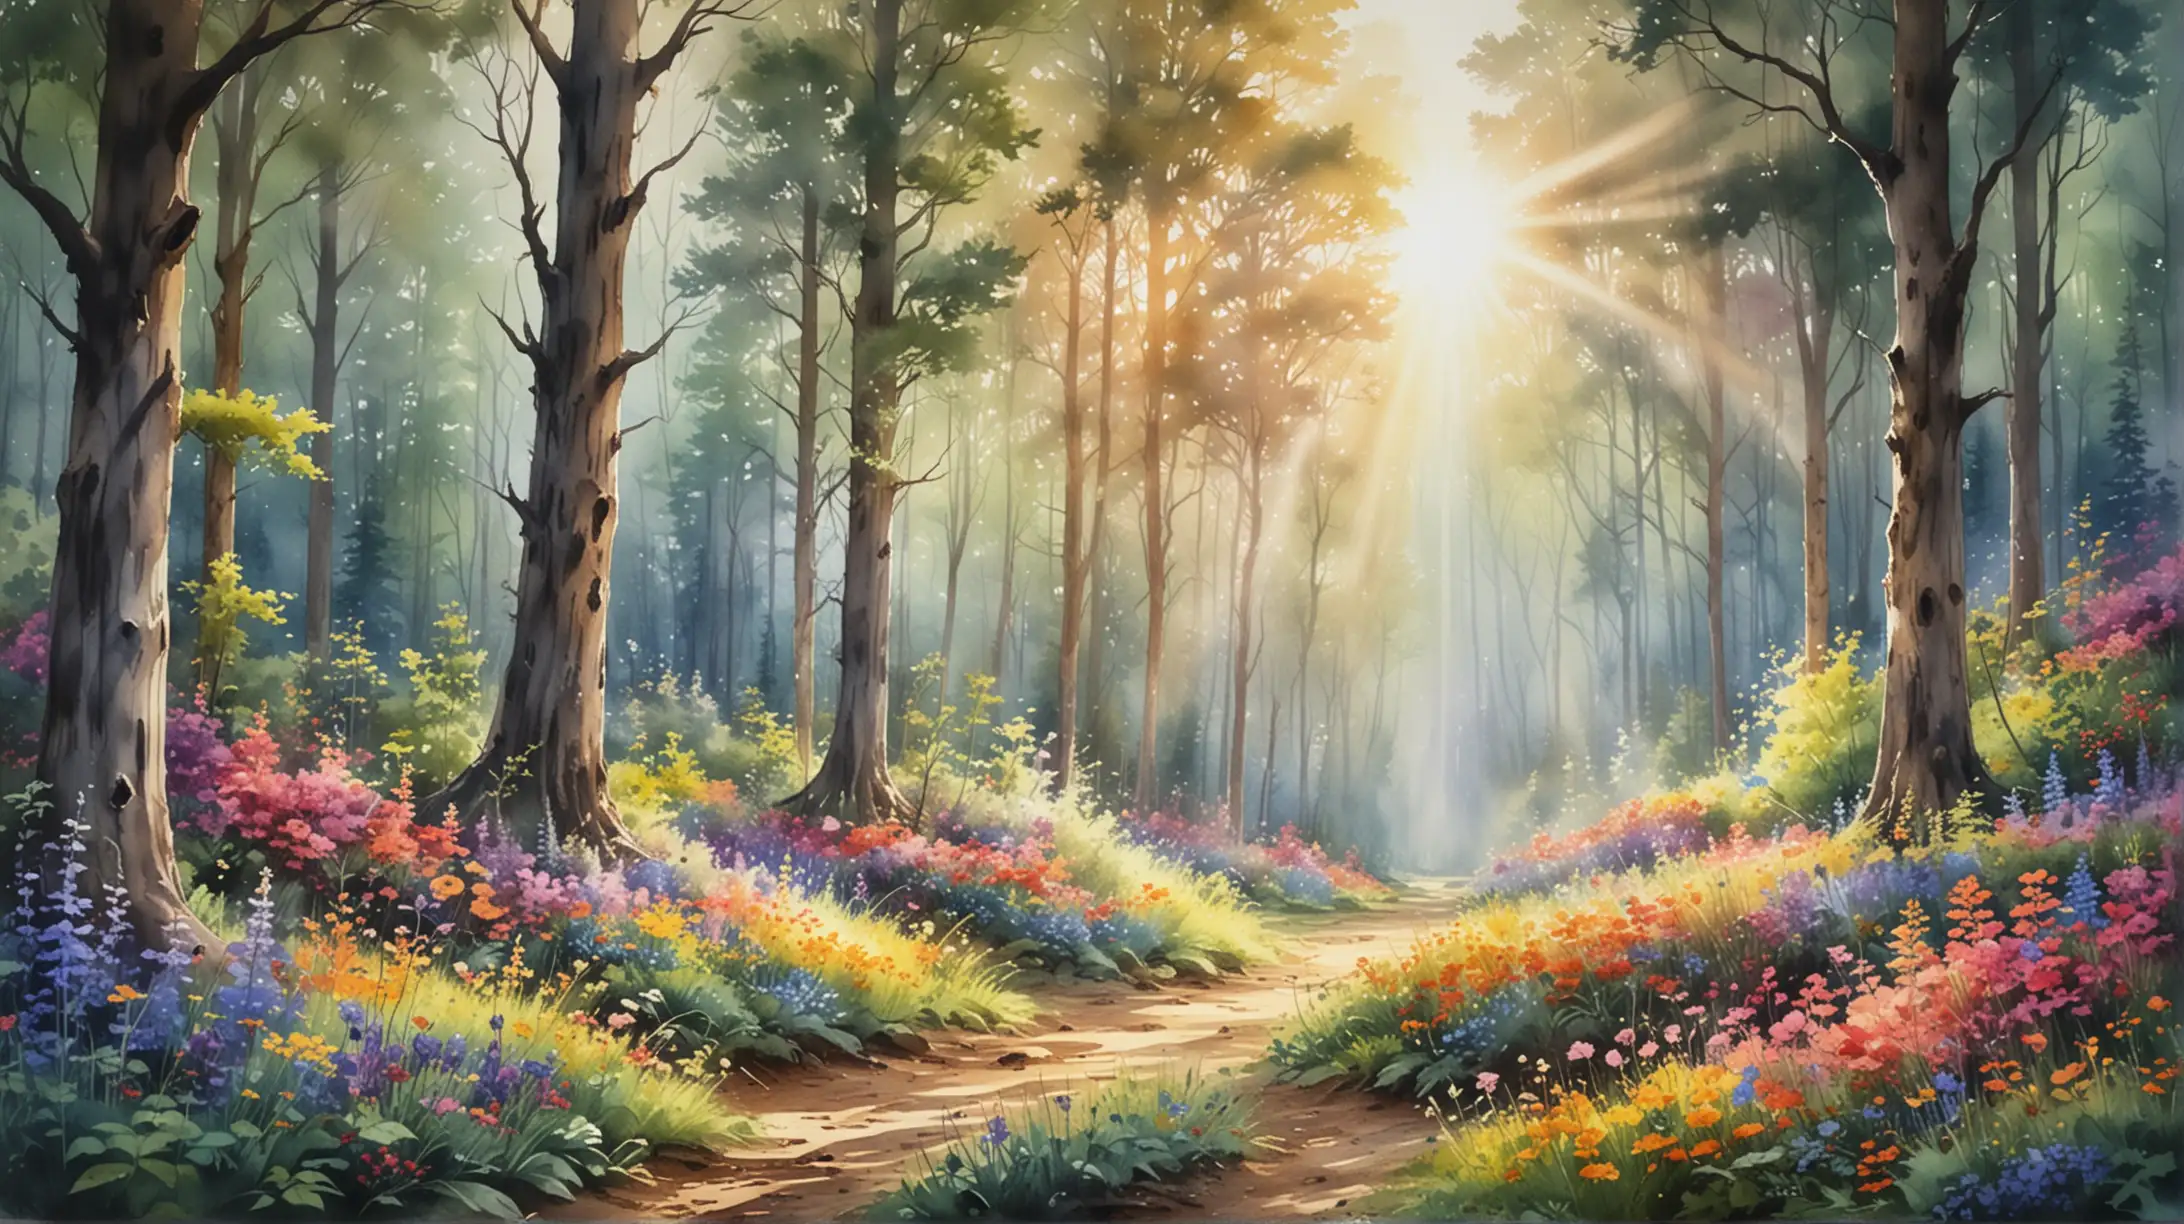 Enchanted Forest with Sunlight Filtering Through Trees and Watercolor Style